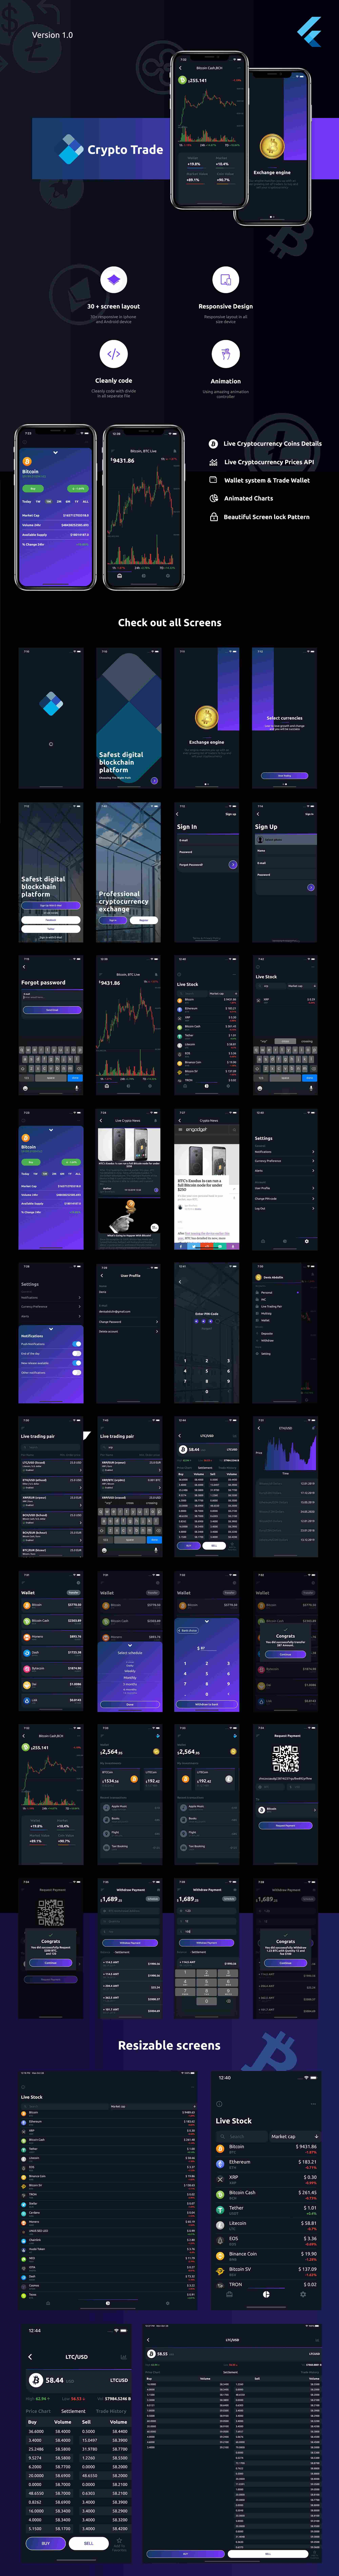 Crypto Trading Android + iOS + Figma + XD + Sketch | Flutter | Template | Wallet - 2